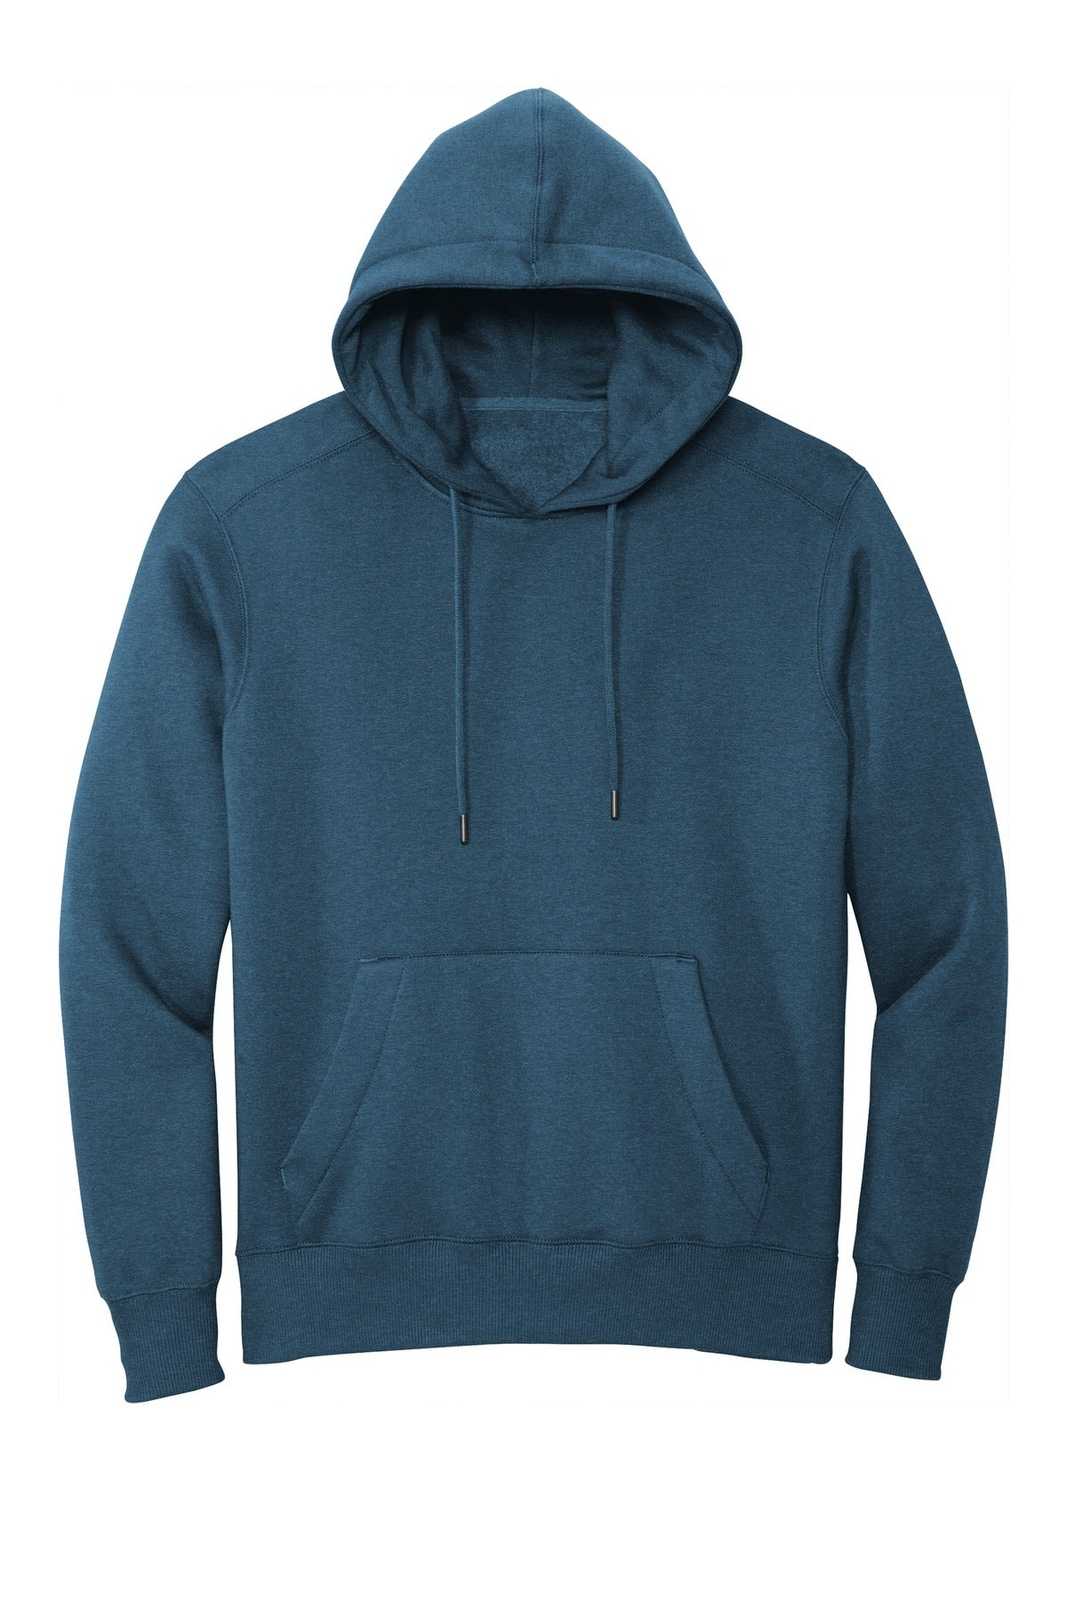 District DT1101 Perfect Weight Fleece Hoodie - Heathered Poseidon Blue - HIT a Double - 5